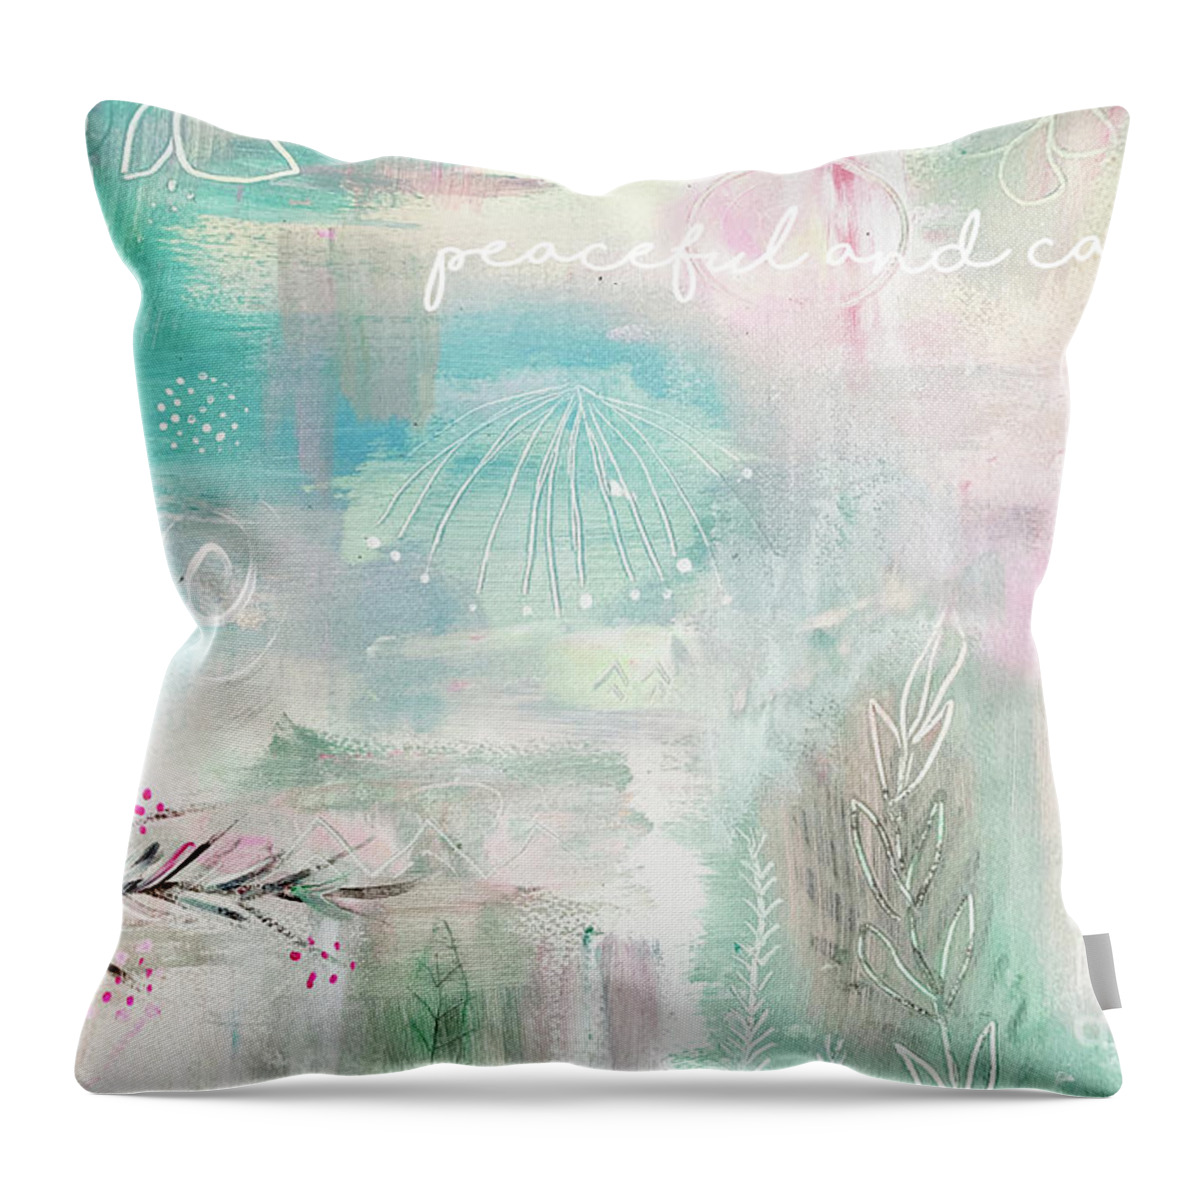 Peaceful And Calm Throw Pillow featuring the mixed media Peaceful and calm by Claudia Schoen